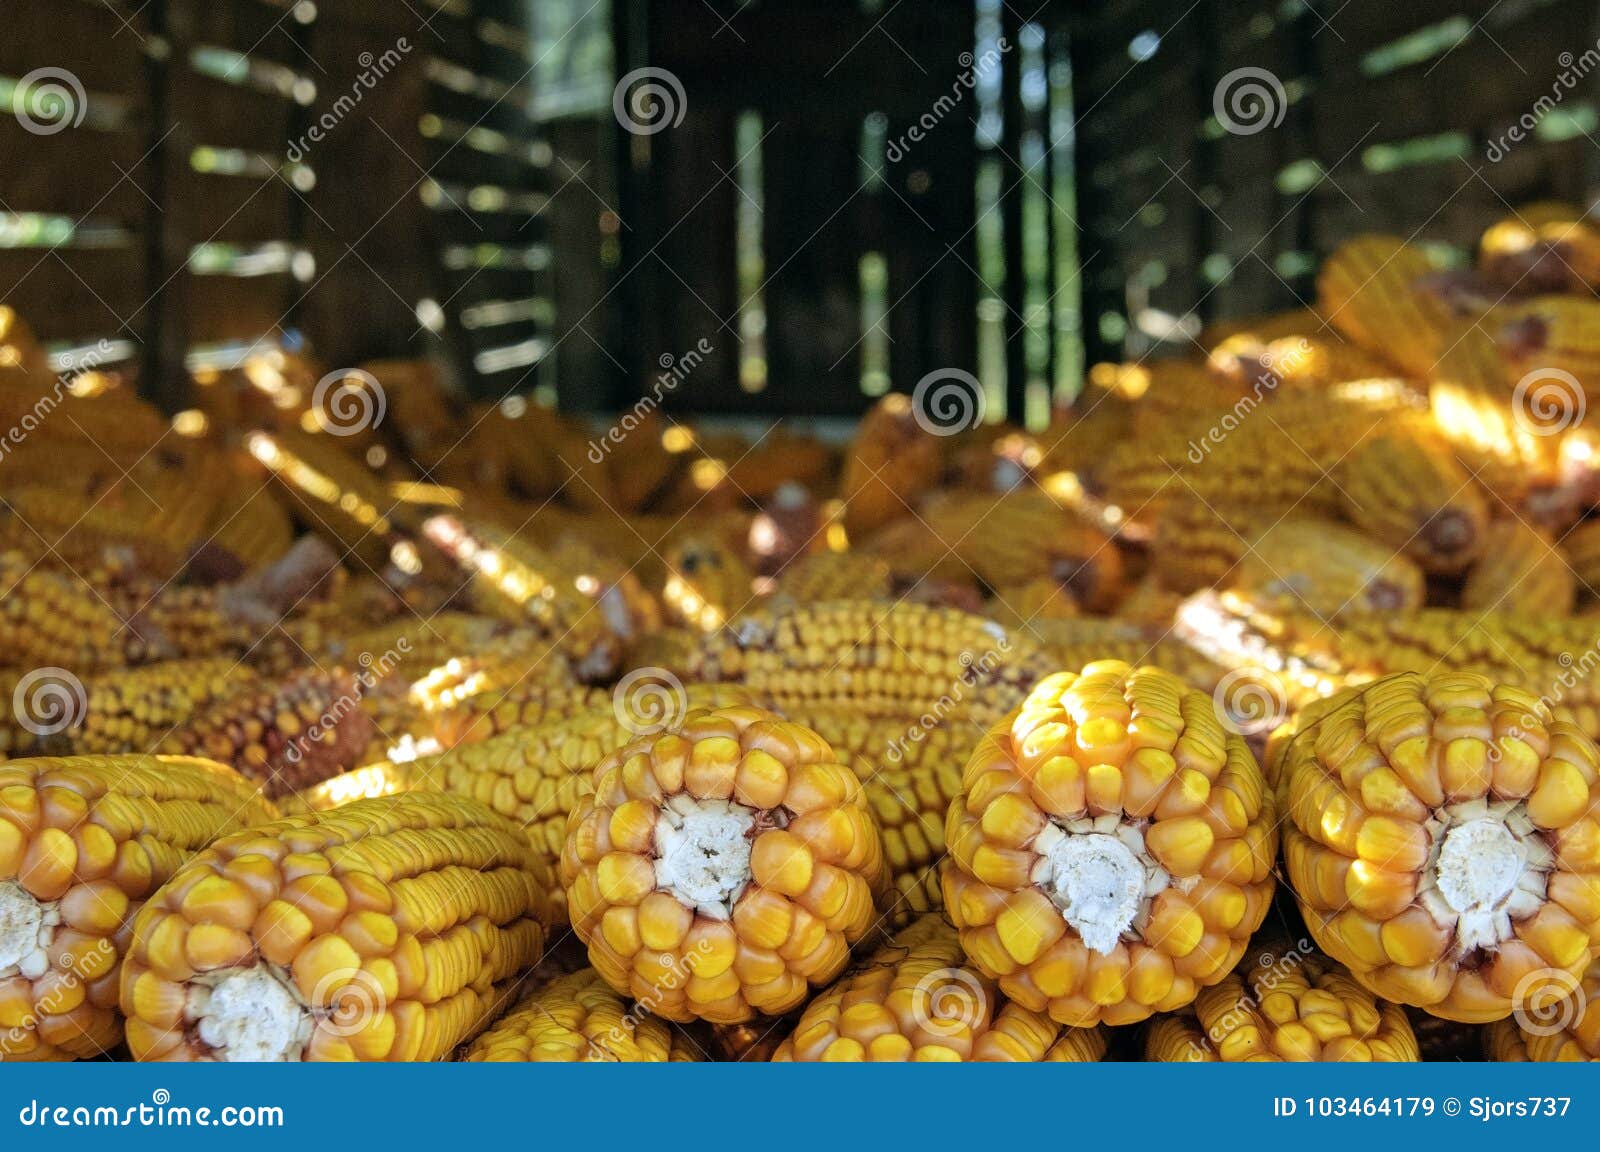 still life of maize ears in horreo in galicia spain